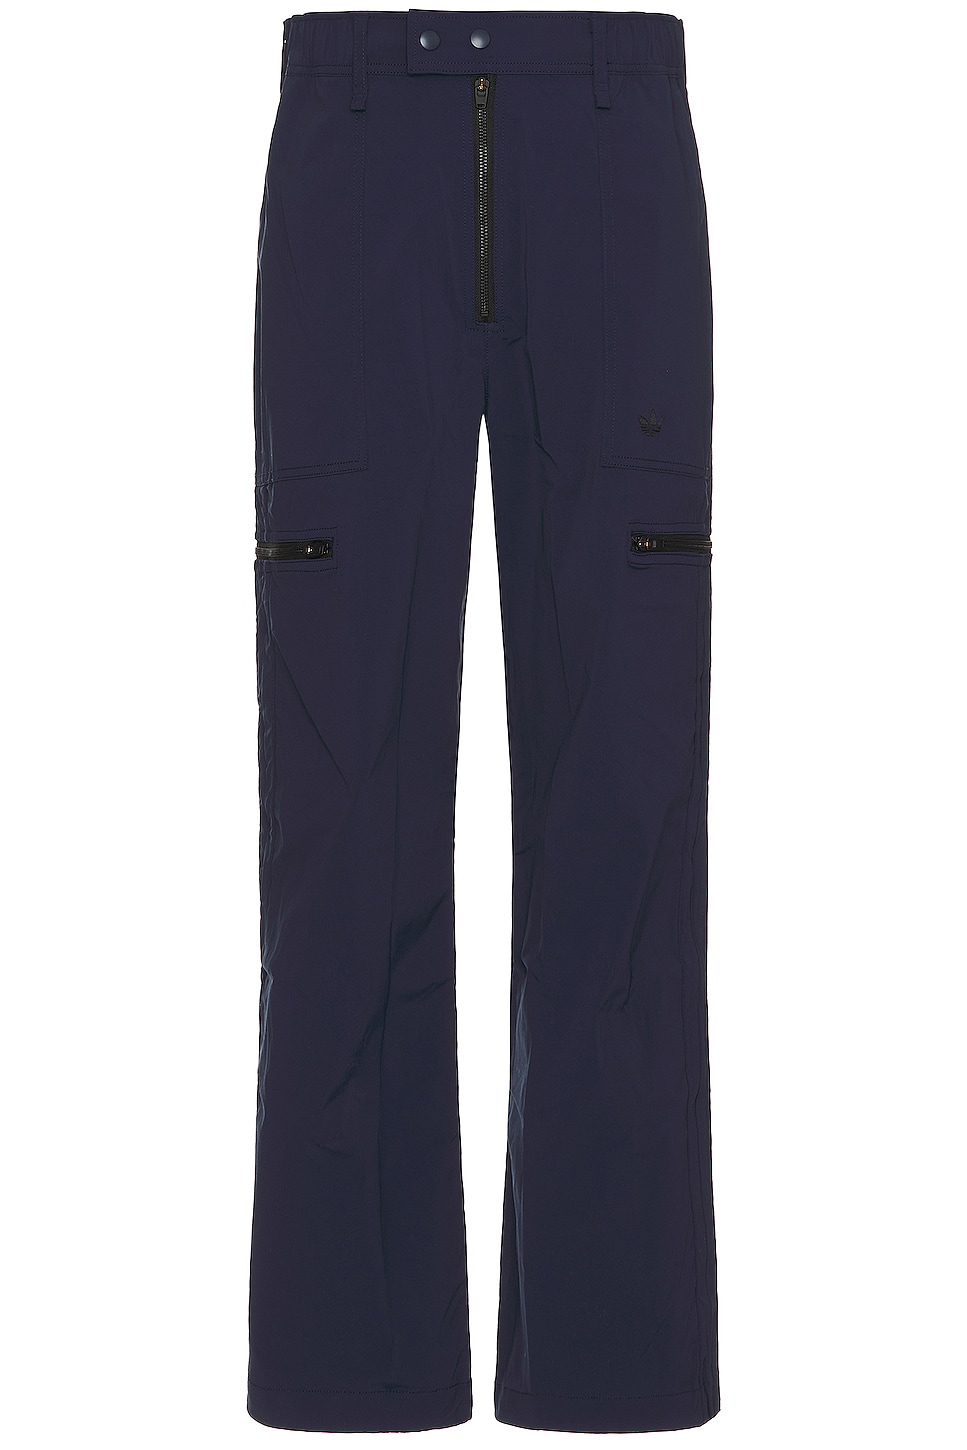 Image 1 of adidas by Wales Bonner Cargo Pants in Collegiate Navy